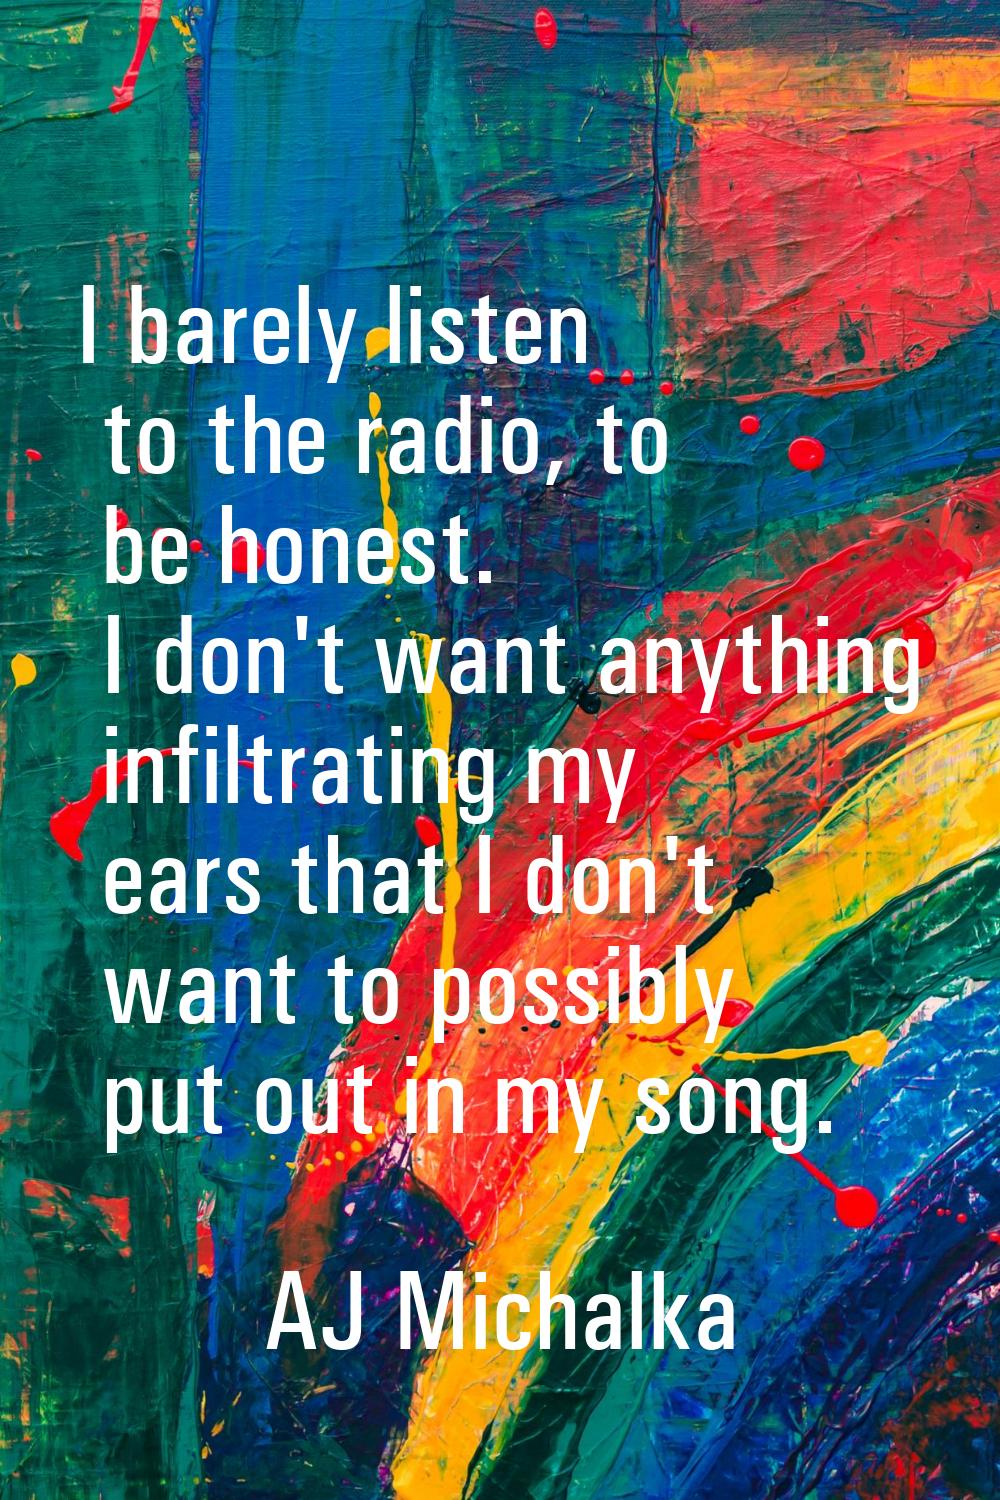 I barely listen to the radio, to be honest. I don't want anything infiltrating my ears that I don't